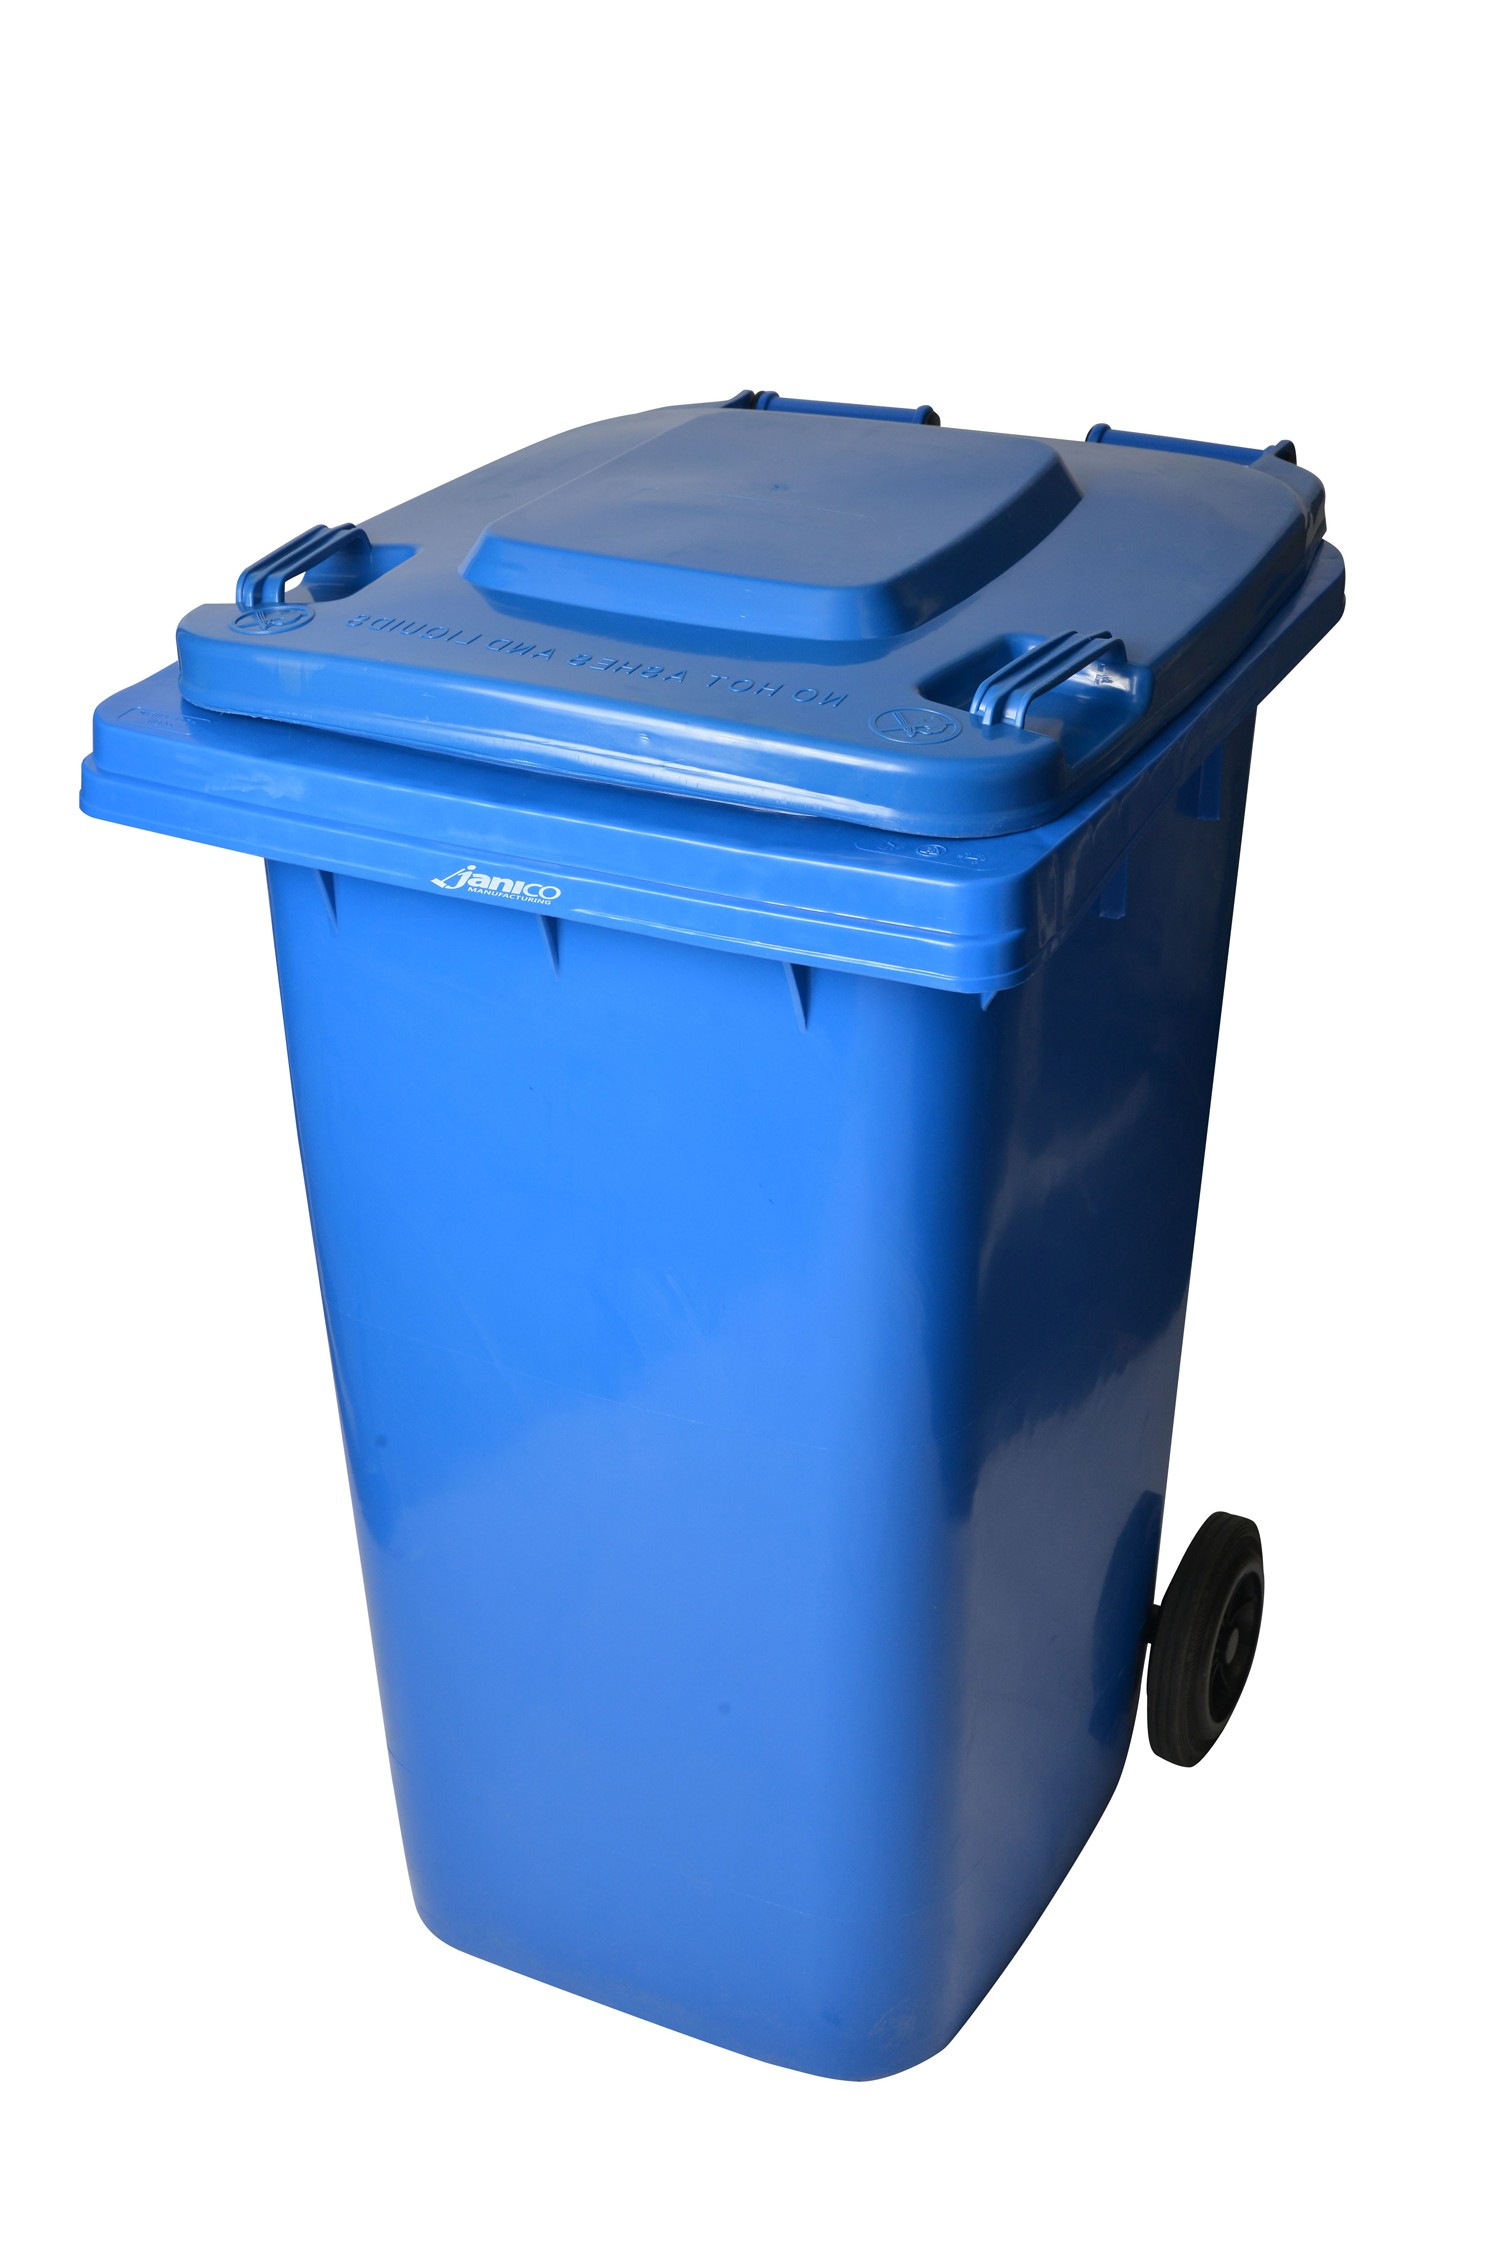 CLoxks Garbage Container Bin 660L Outdoor Trash Can with Universal Wheels  Large-Capacity Trash Can with Lid Thickened Plastic Sanitation Trailer  Trash